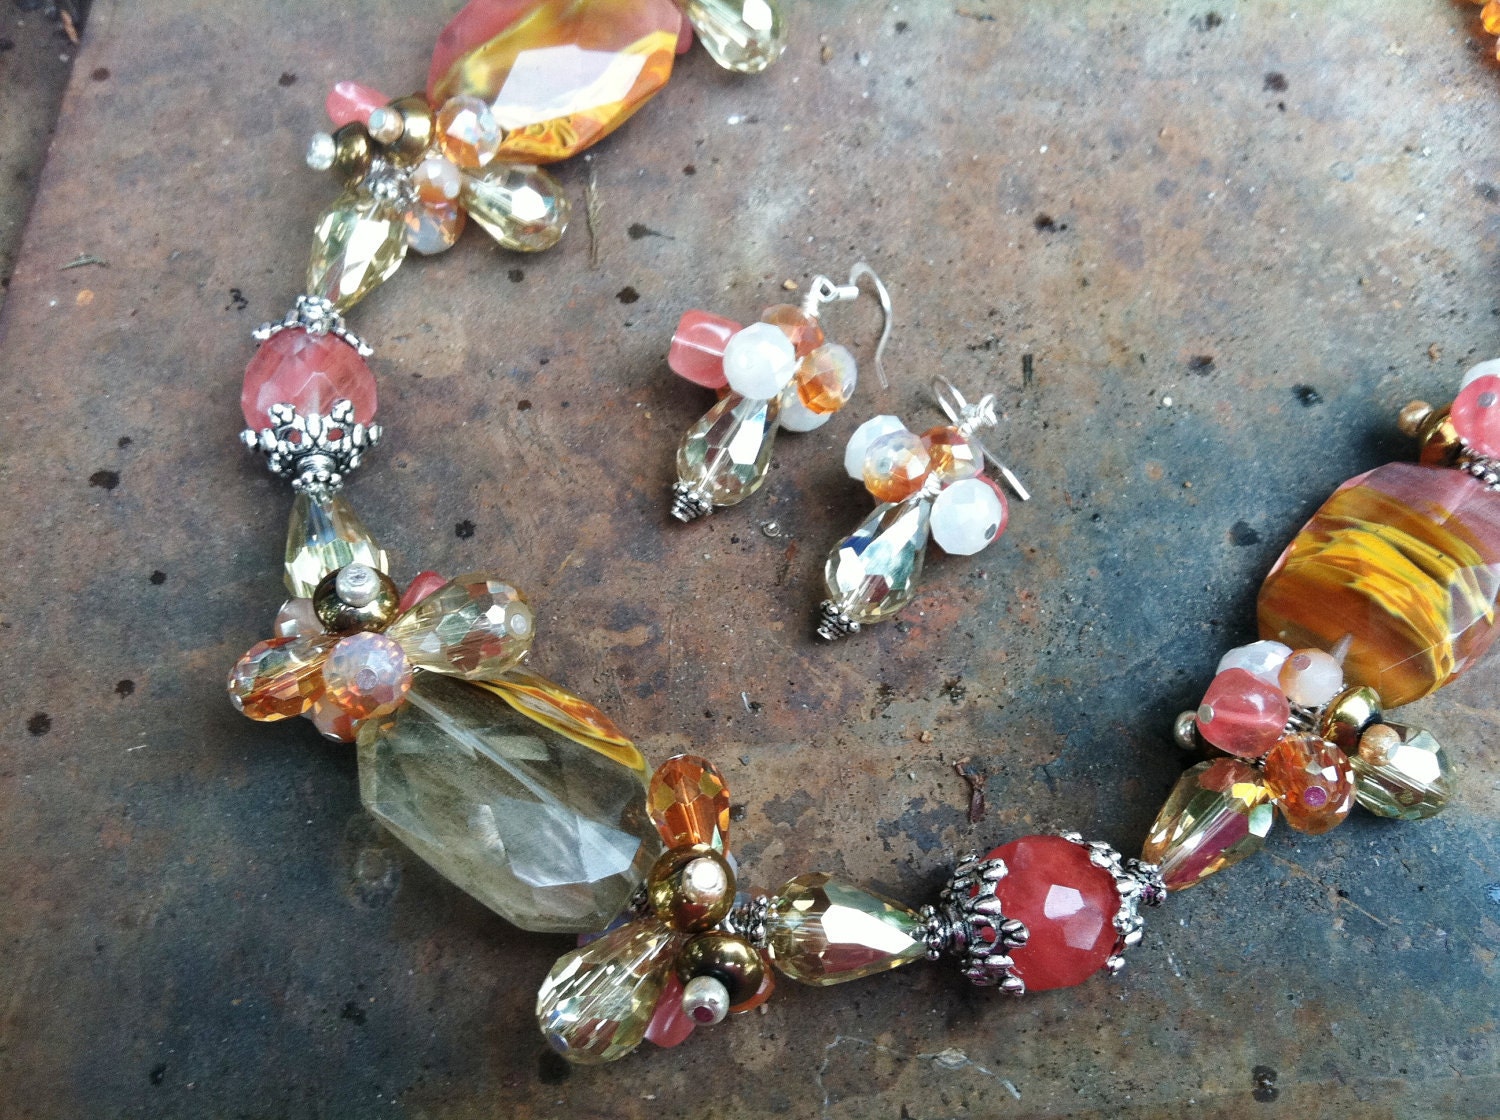 Cherry and Volcano Quartz with Glass Beads and Crystals Necklace and Earrings